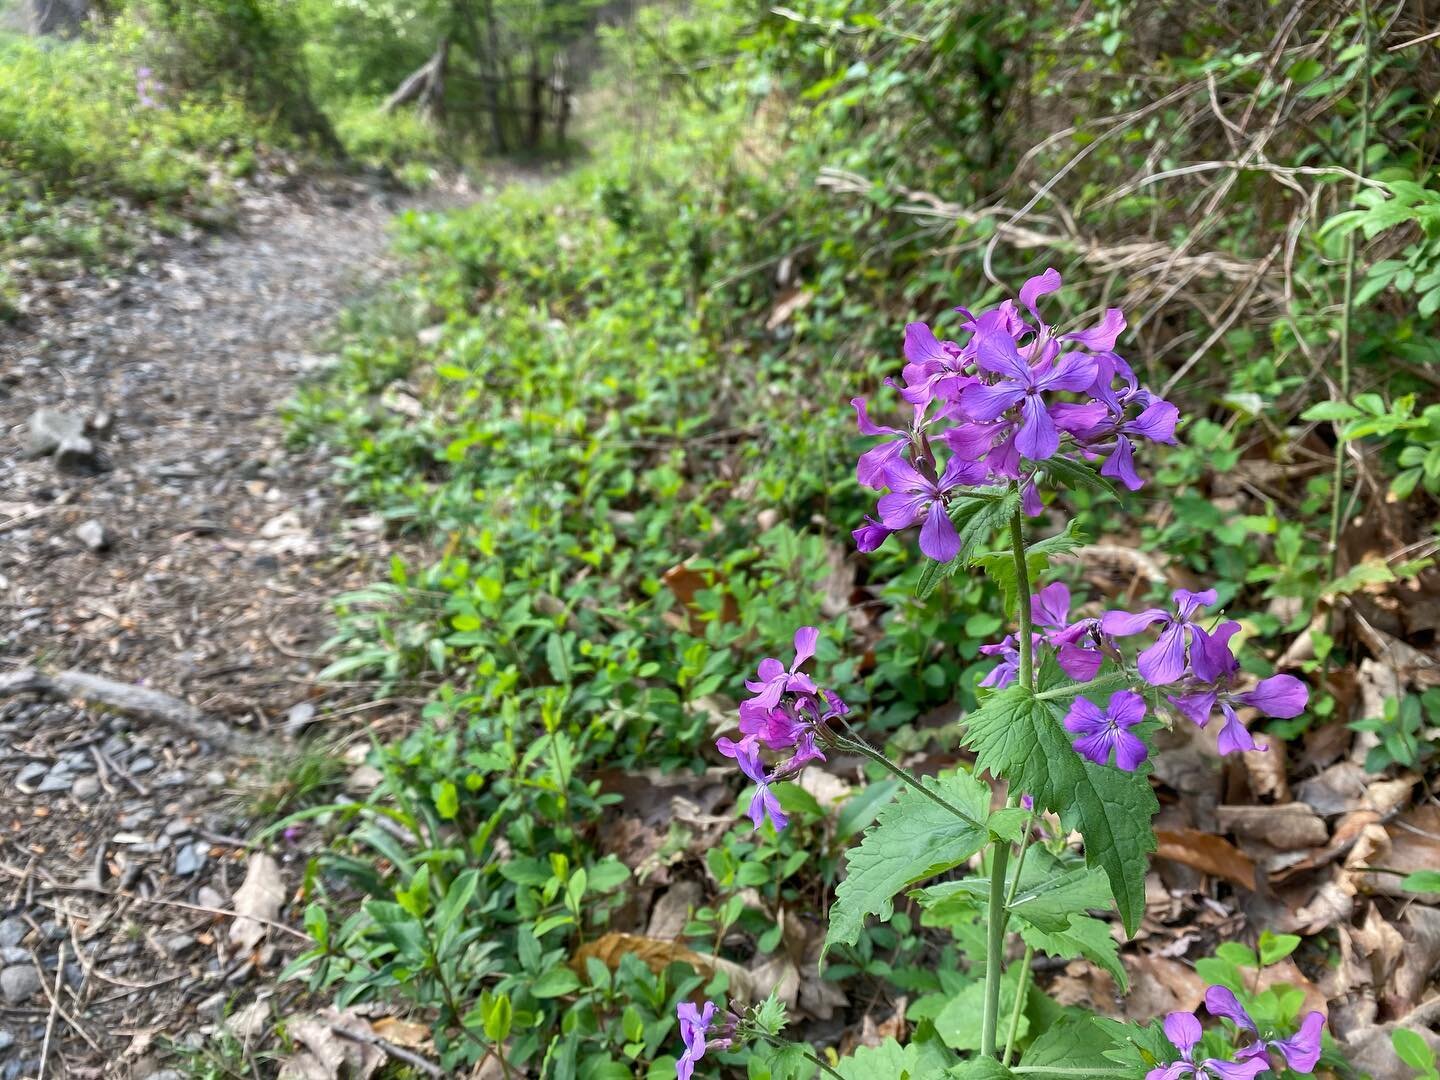 Spring has sprung! ☀️ Take notice of the ground cover coming back to life, flowers providing early food source for pollinators, and trees beginning to bud. 

Where do you see spring in your backyard spaces and local parks?

Don&rsquo;t forget to tag 